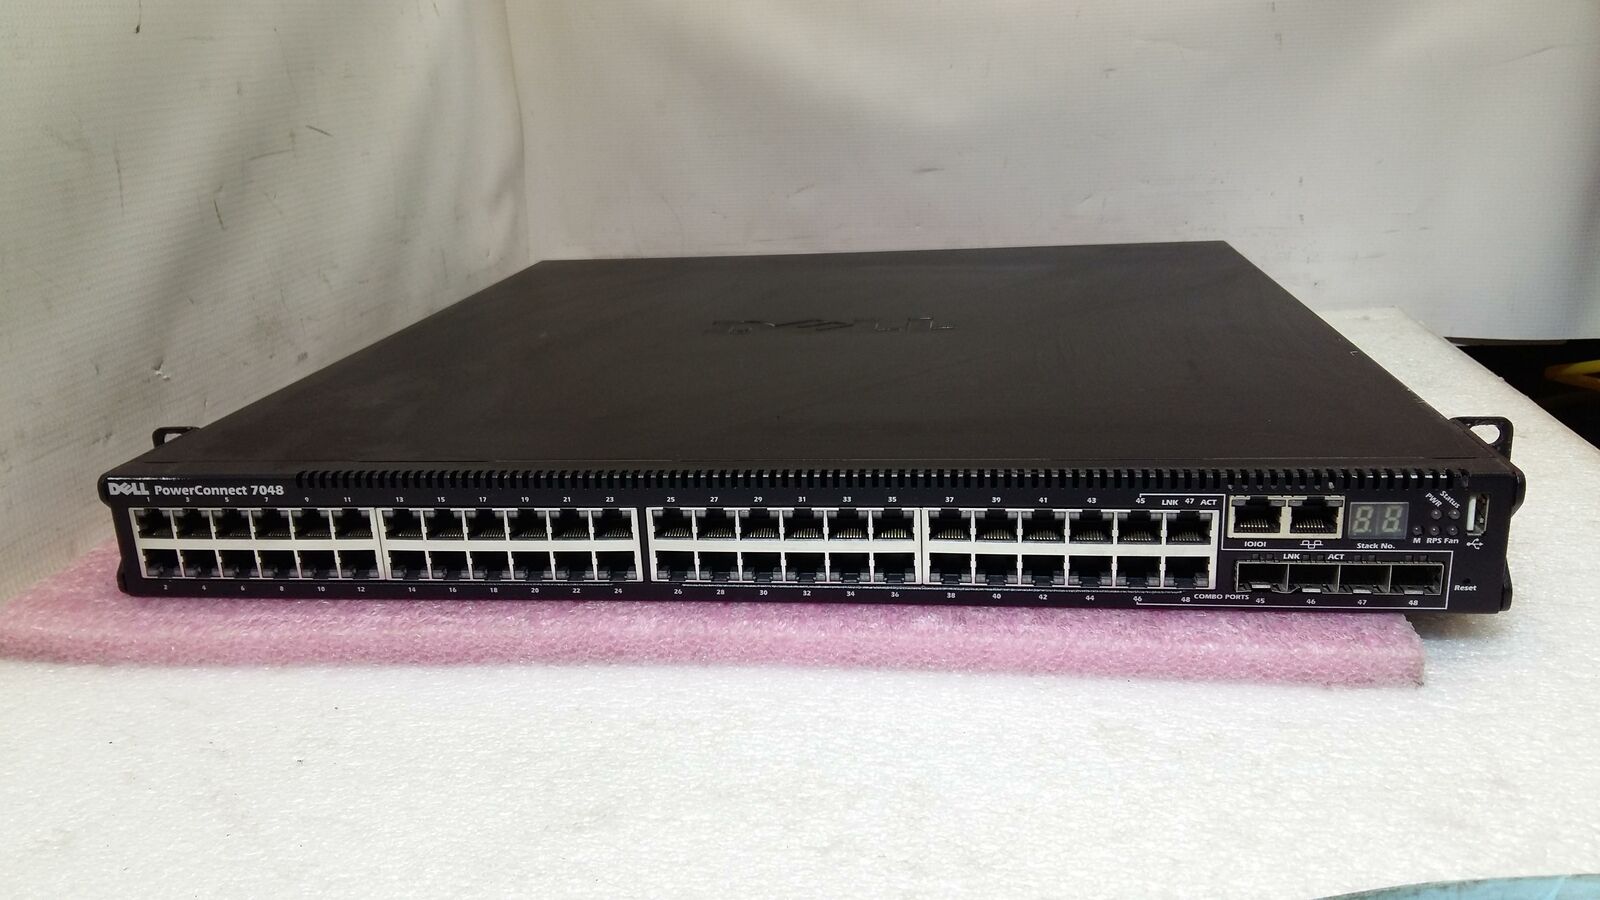 DELL PowerConnect 7048 48 Port Gigabit Ethernet Network Switch_